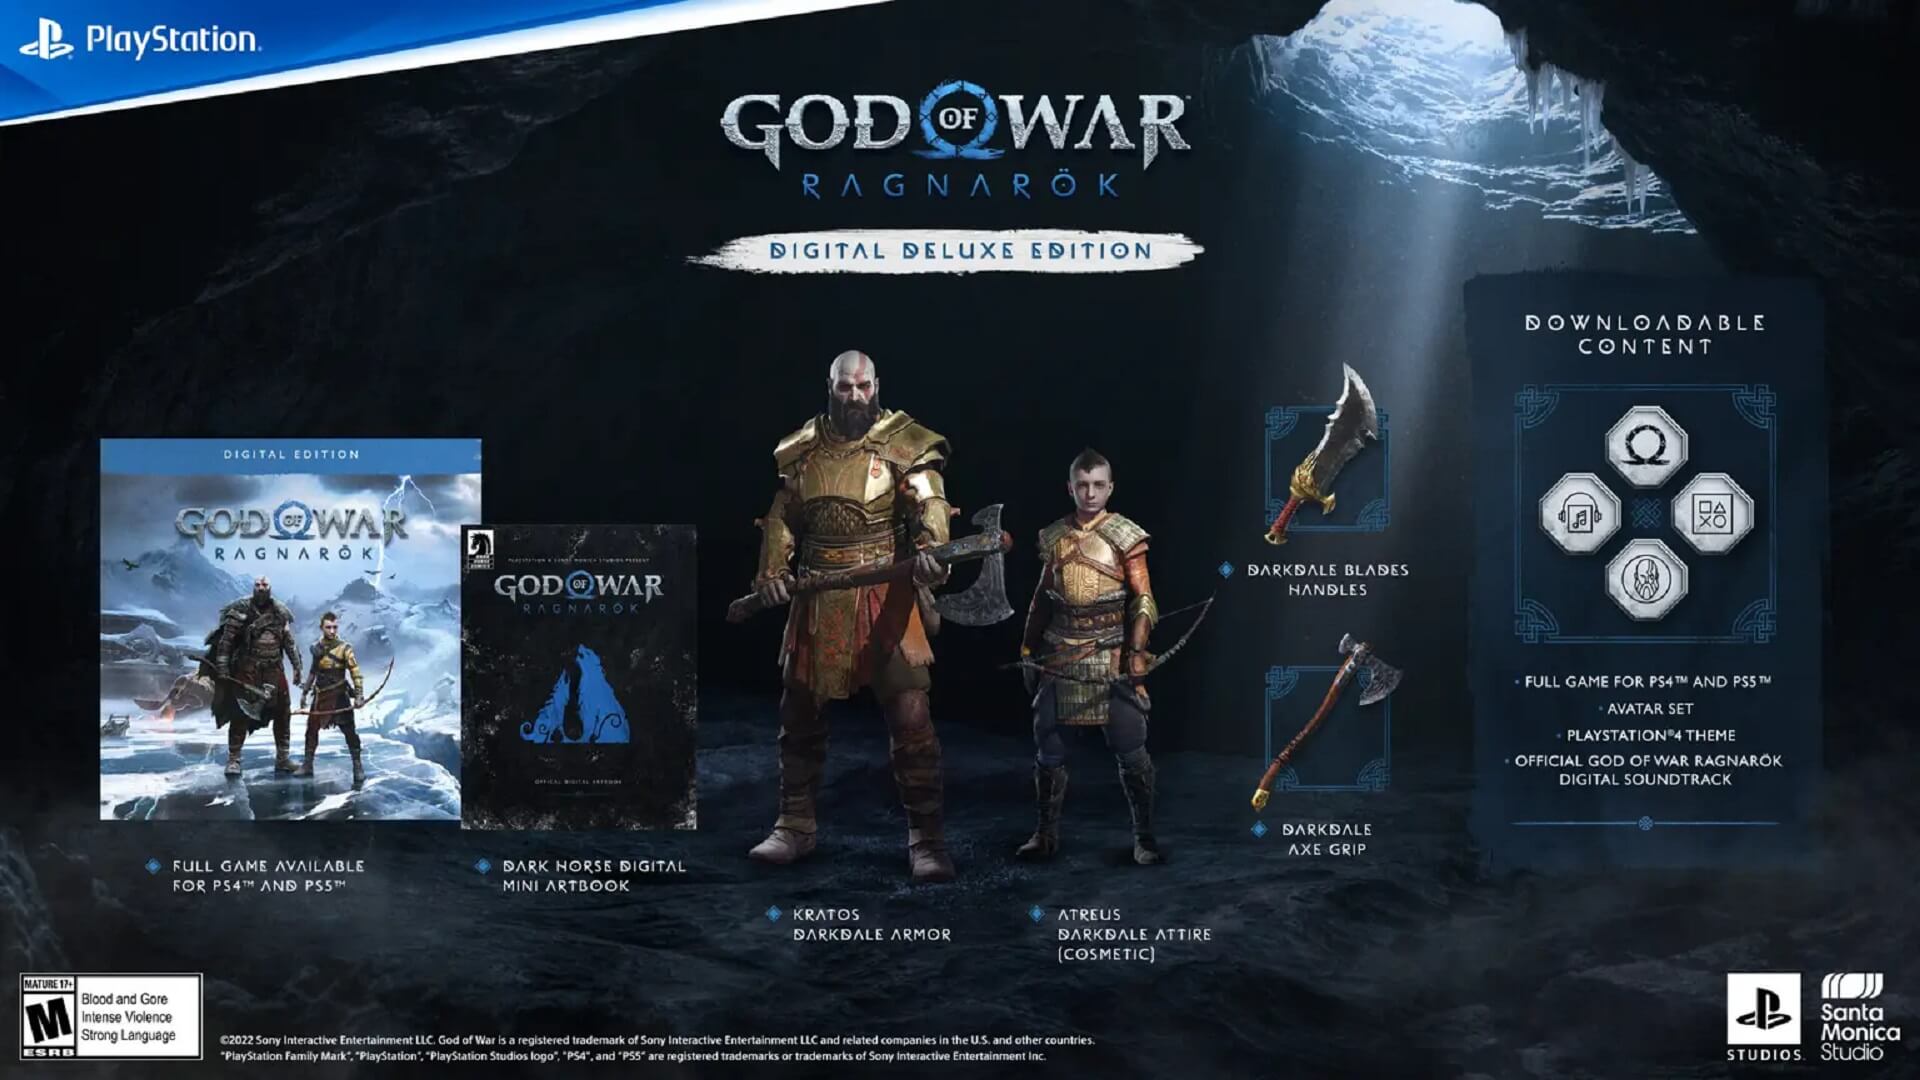 A list of the bonuses available in the God of War Ragnarok Digital Deluxe Edition